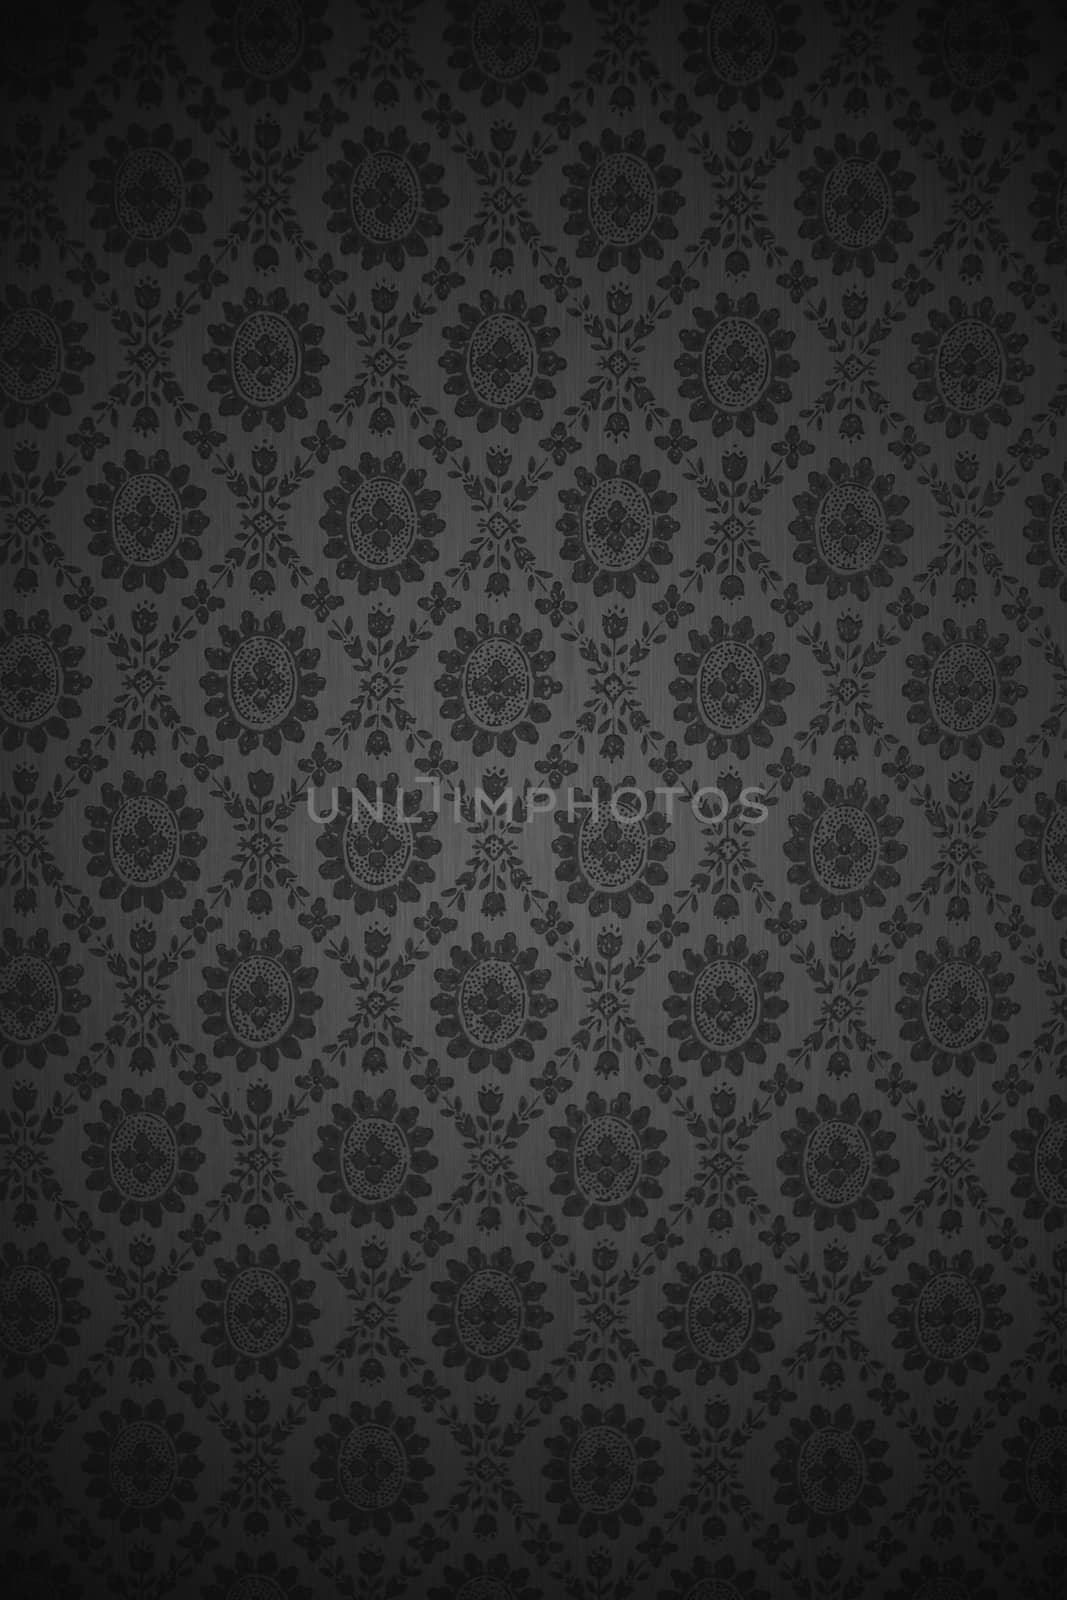 Vertical Meshy Metal Background with Floral Pattern. 